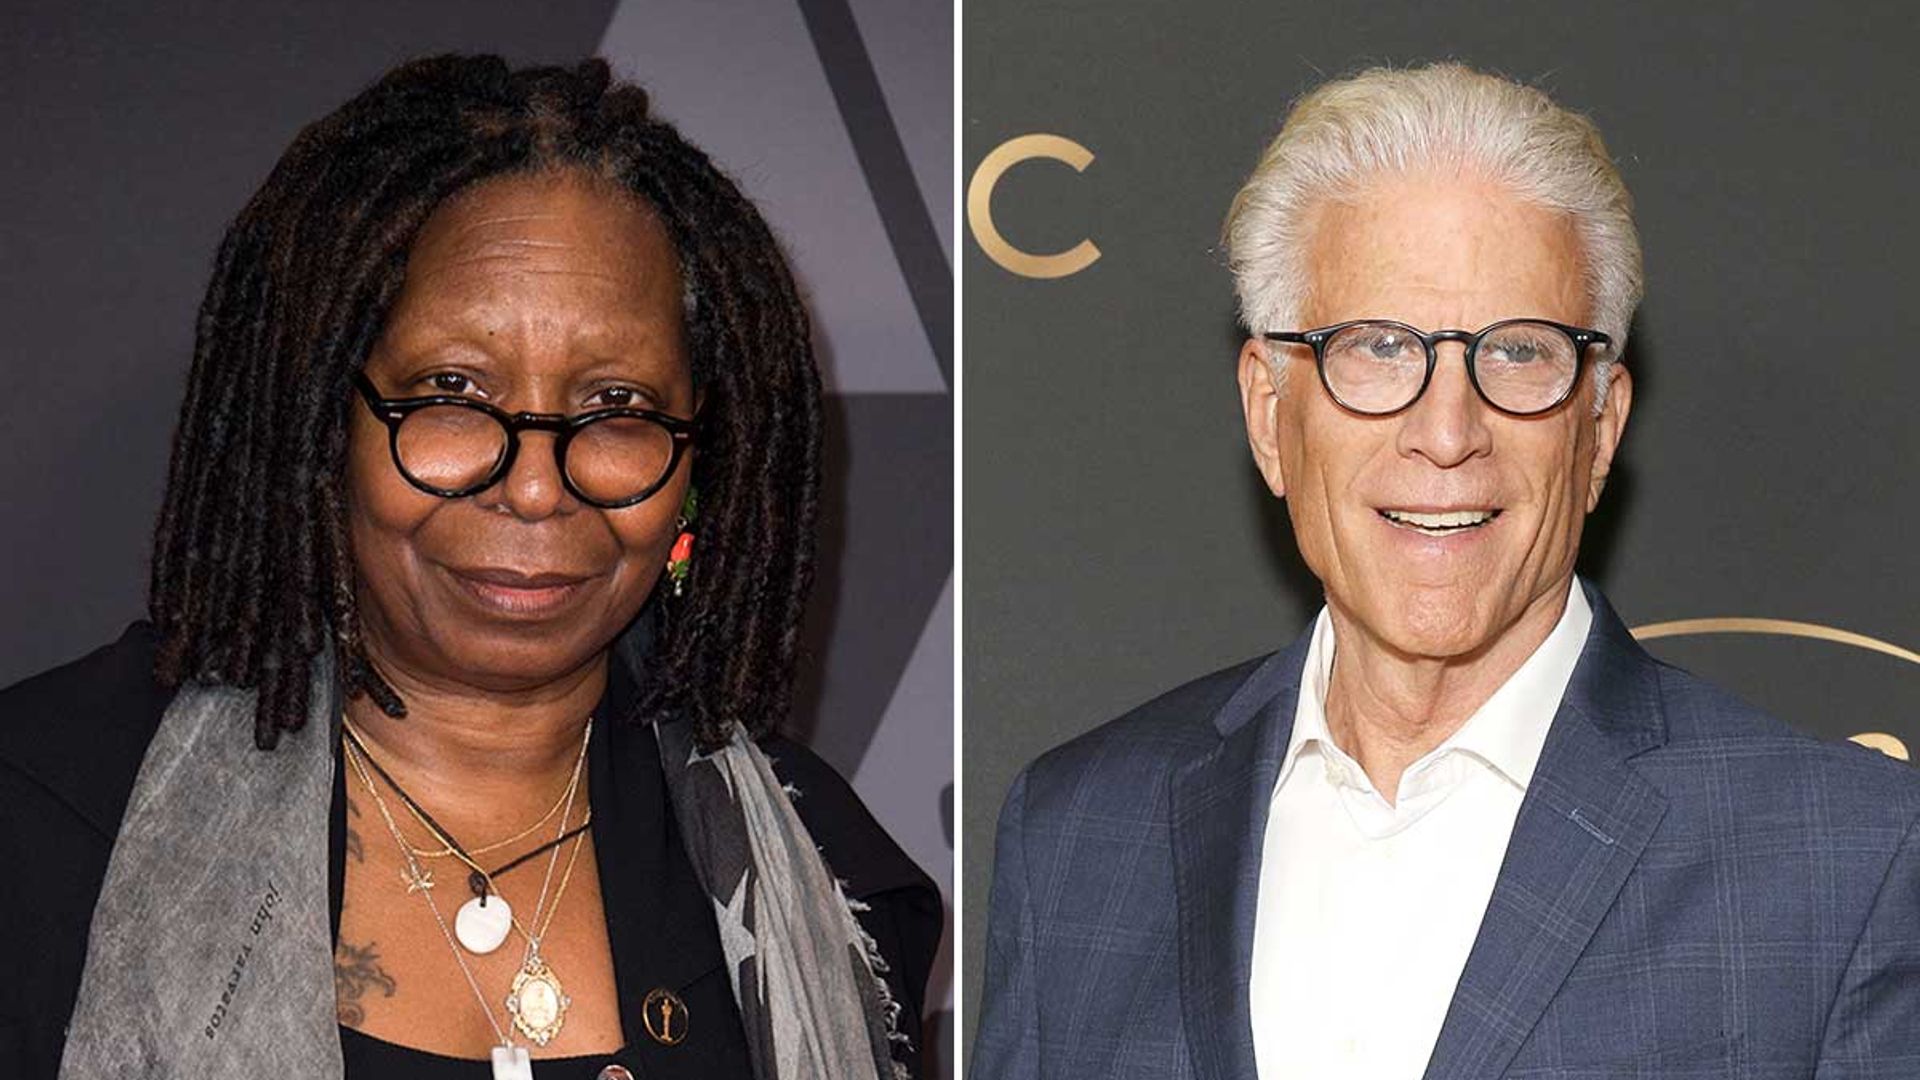 Ted whoopi danson affair and who is